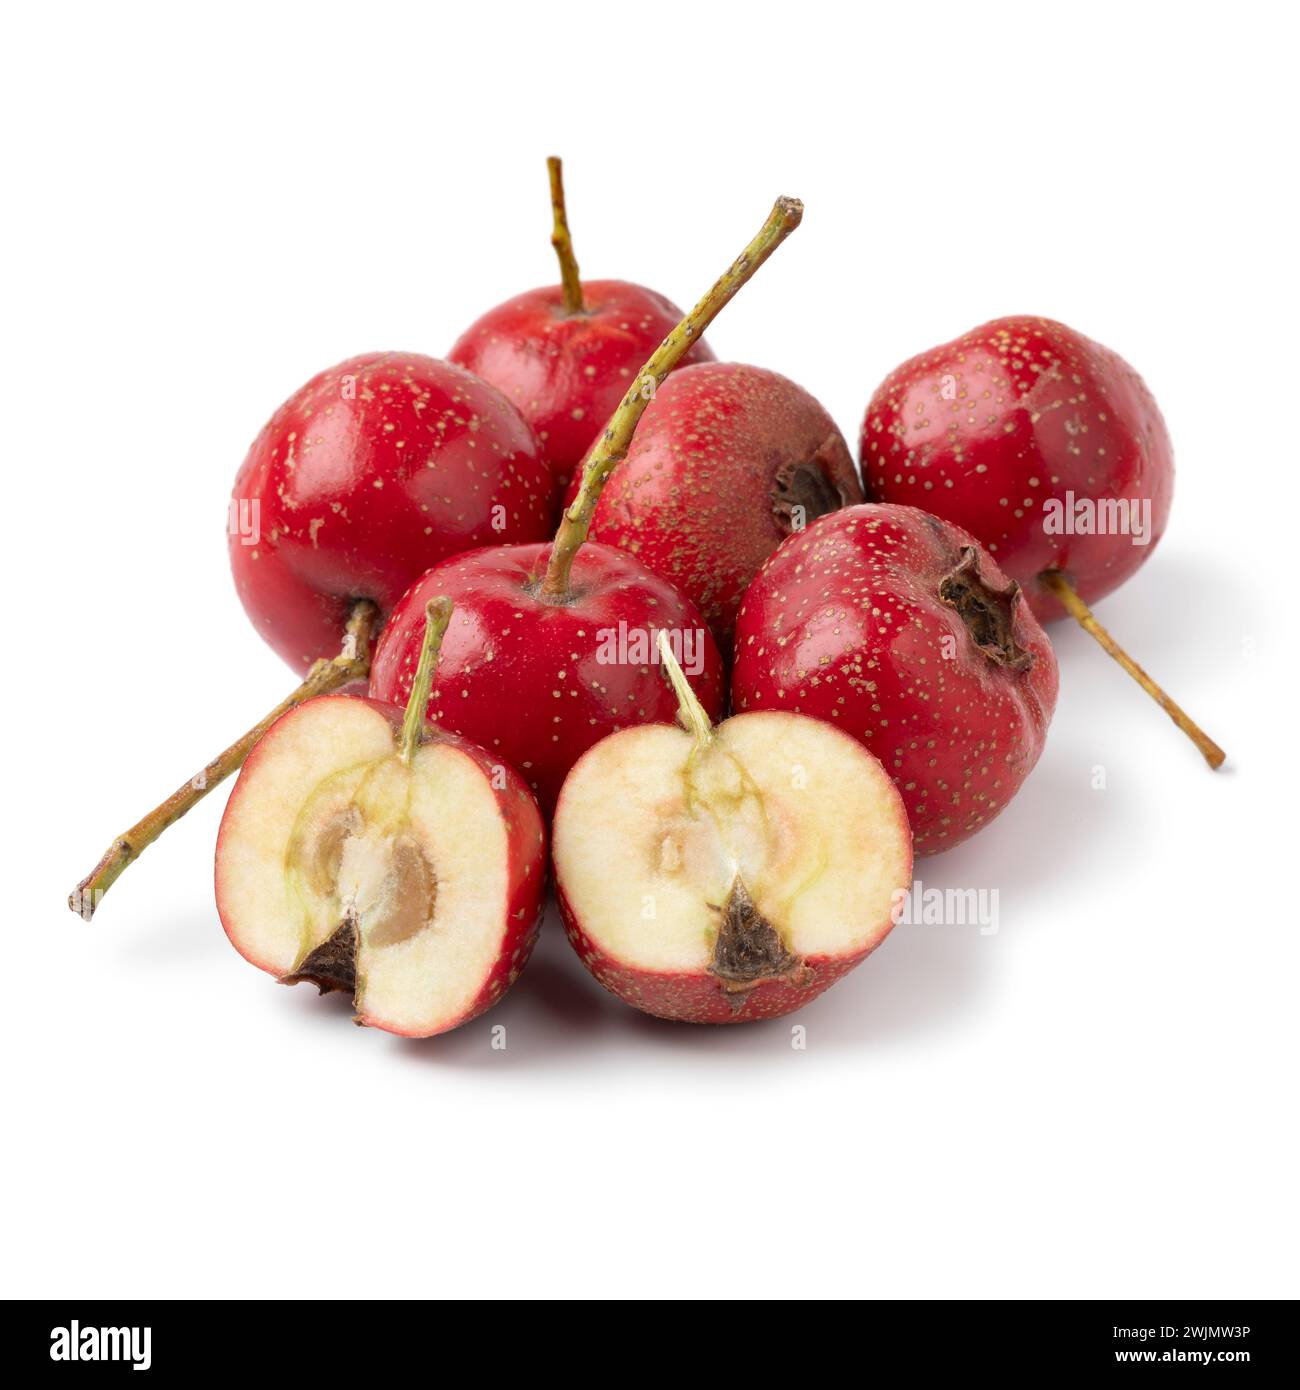 Heap of whole and halved ripe fresh red hawthorne berry close up isolated on white background Stock Photo